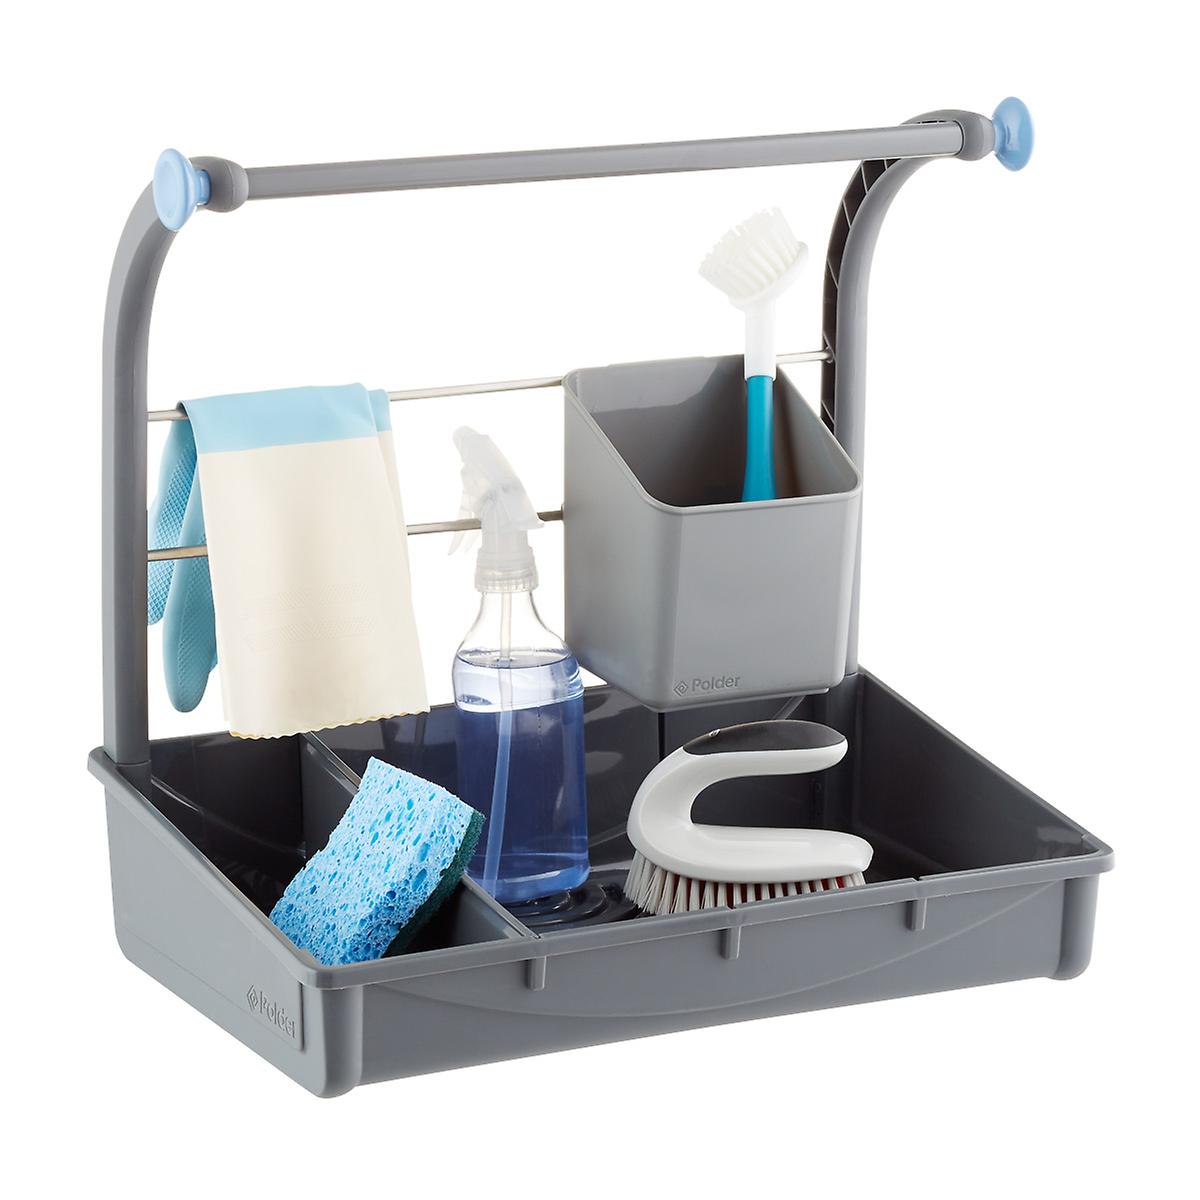 Polder Under the Sink Storage Caddy | The Container Store